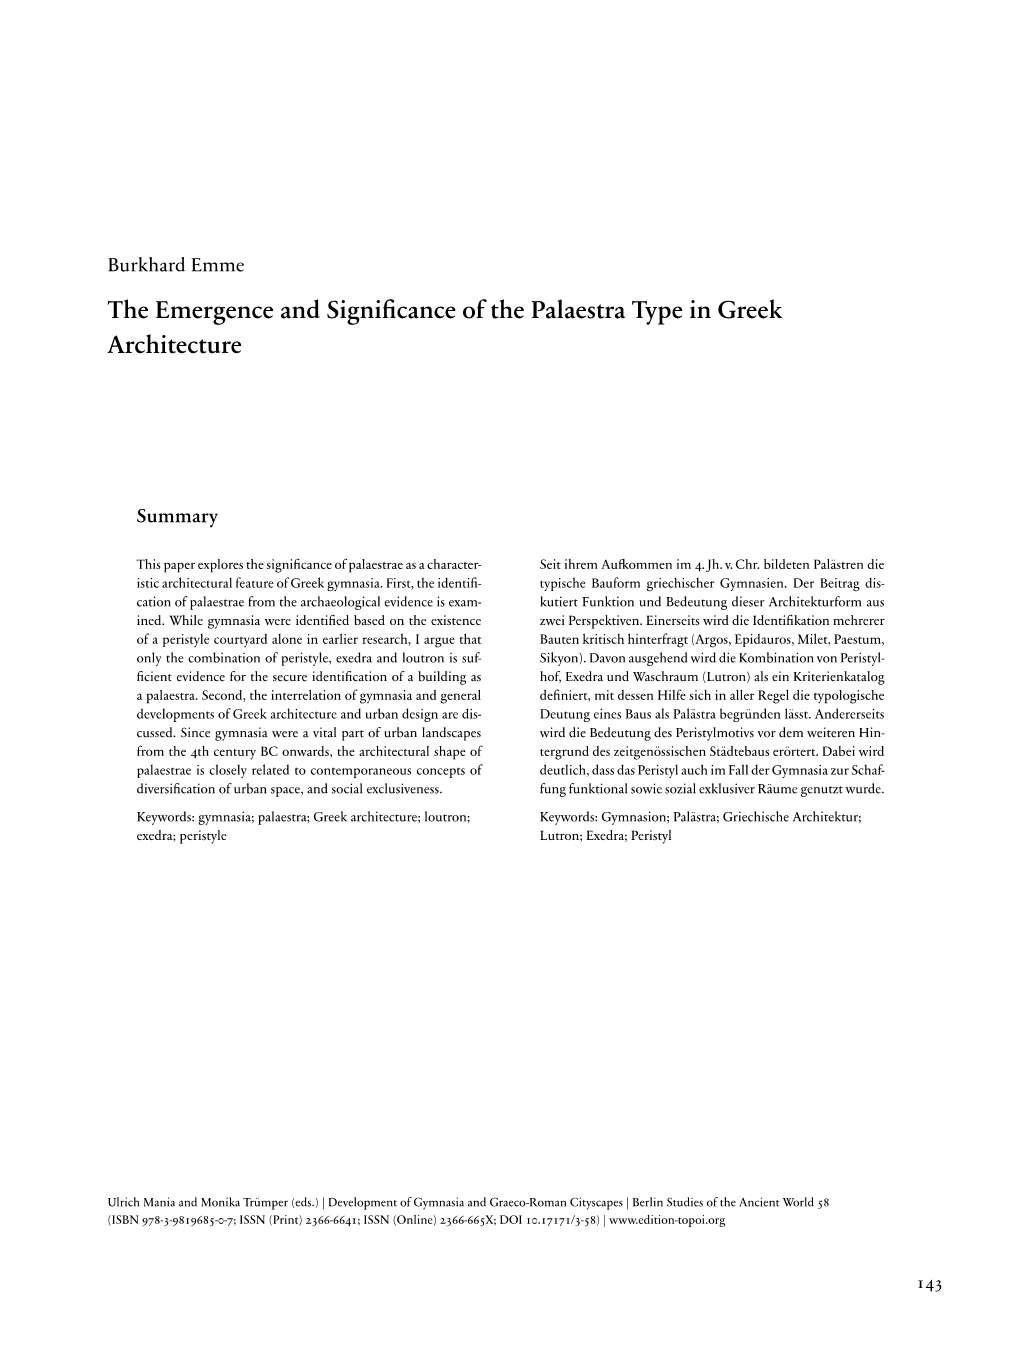 The Emergence and Significance of the Palaestra Type in Greek Architecture